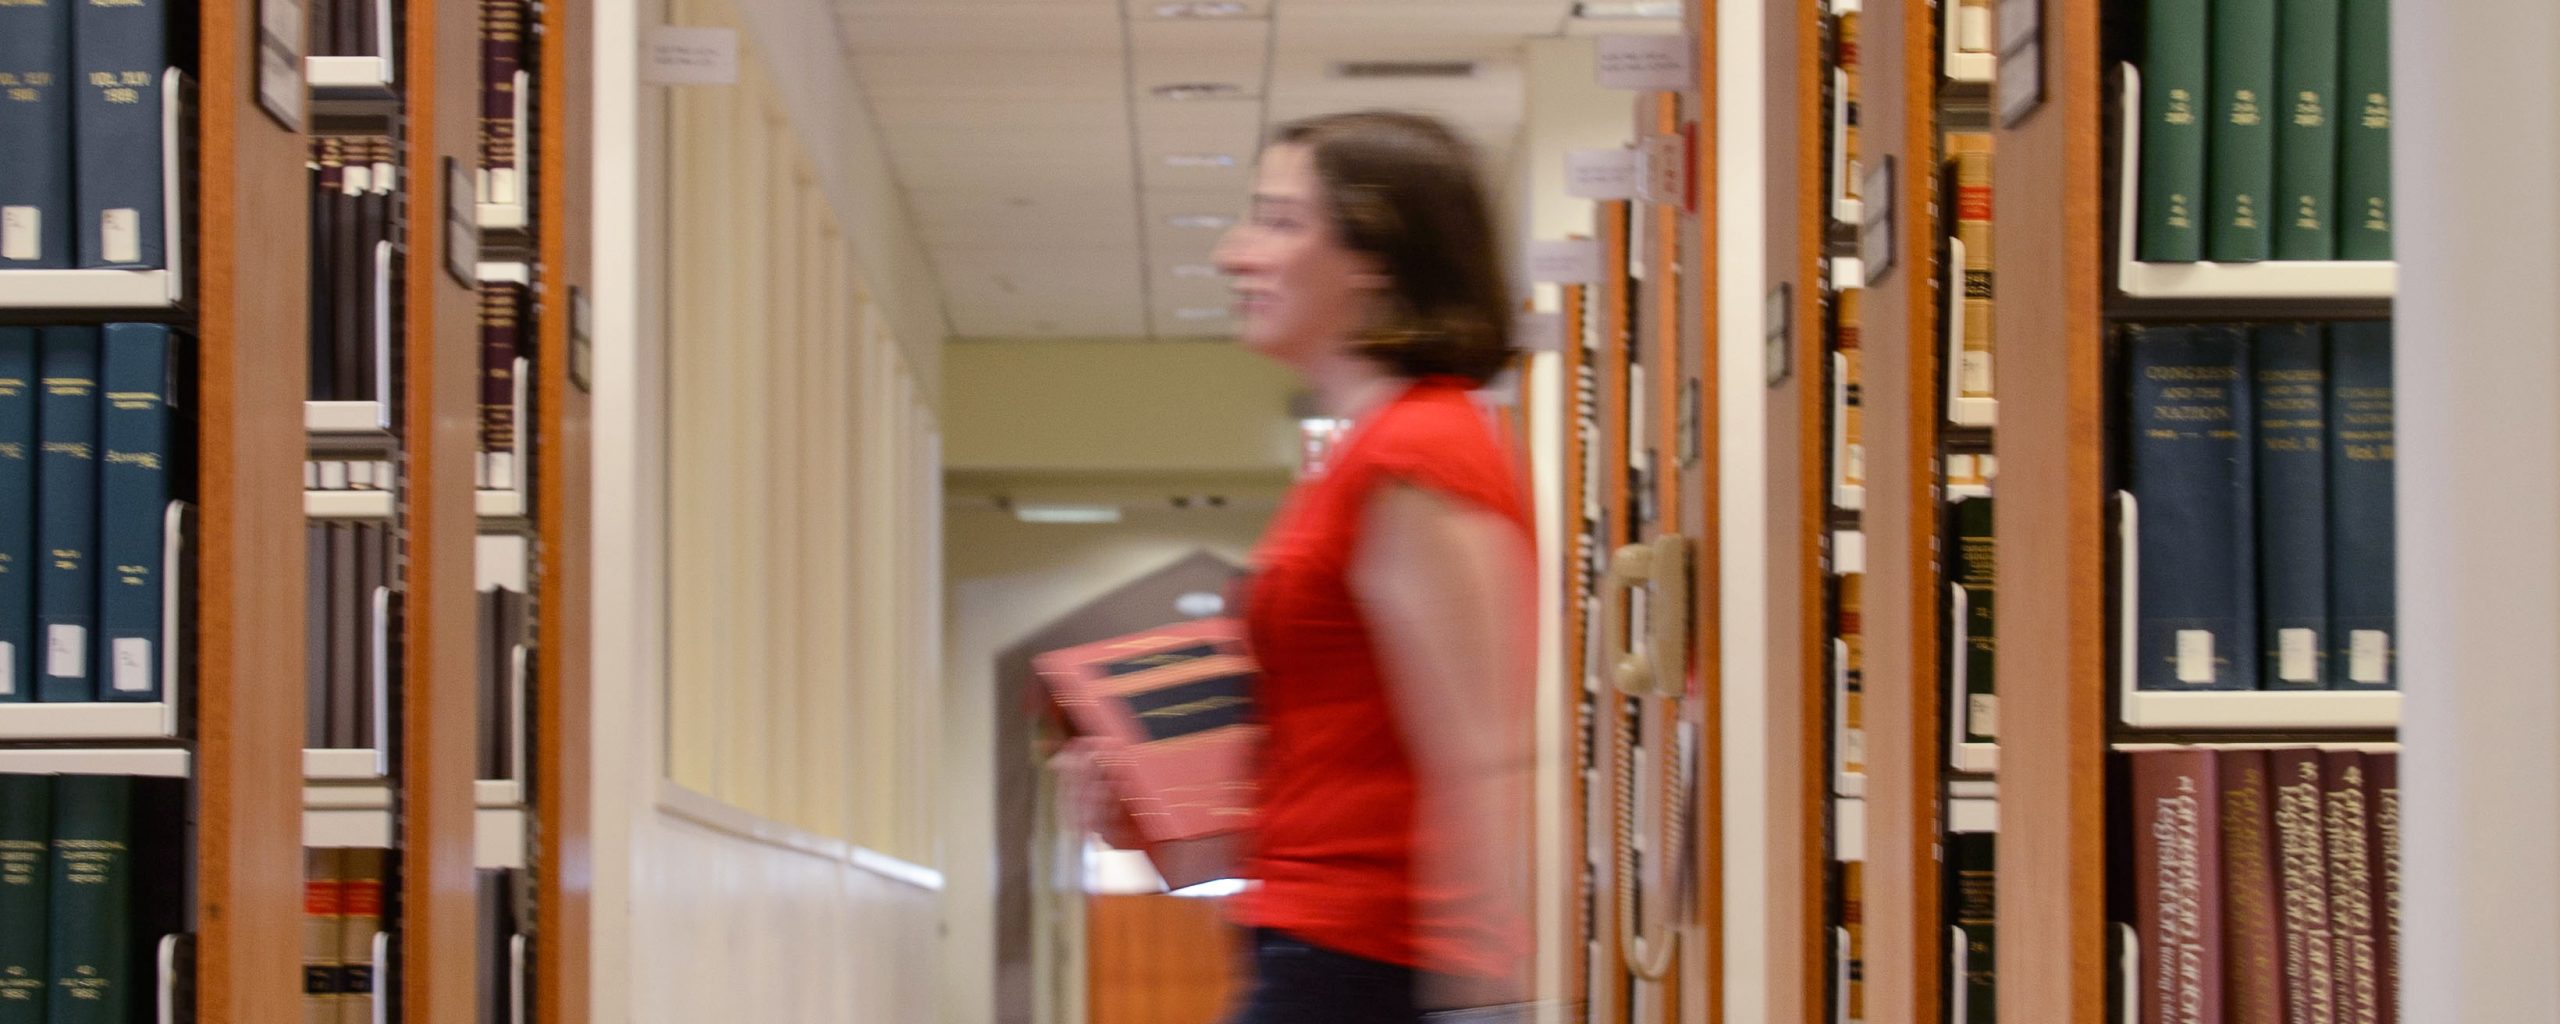 Student walks through the library stacks